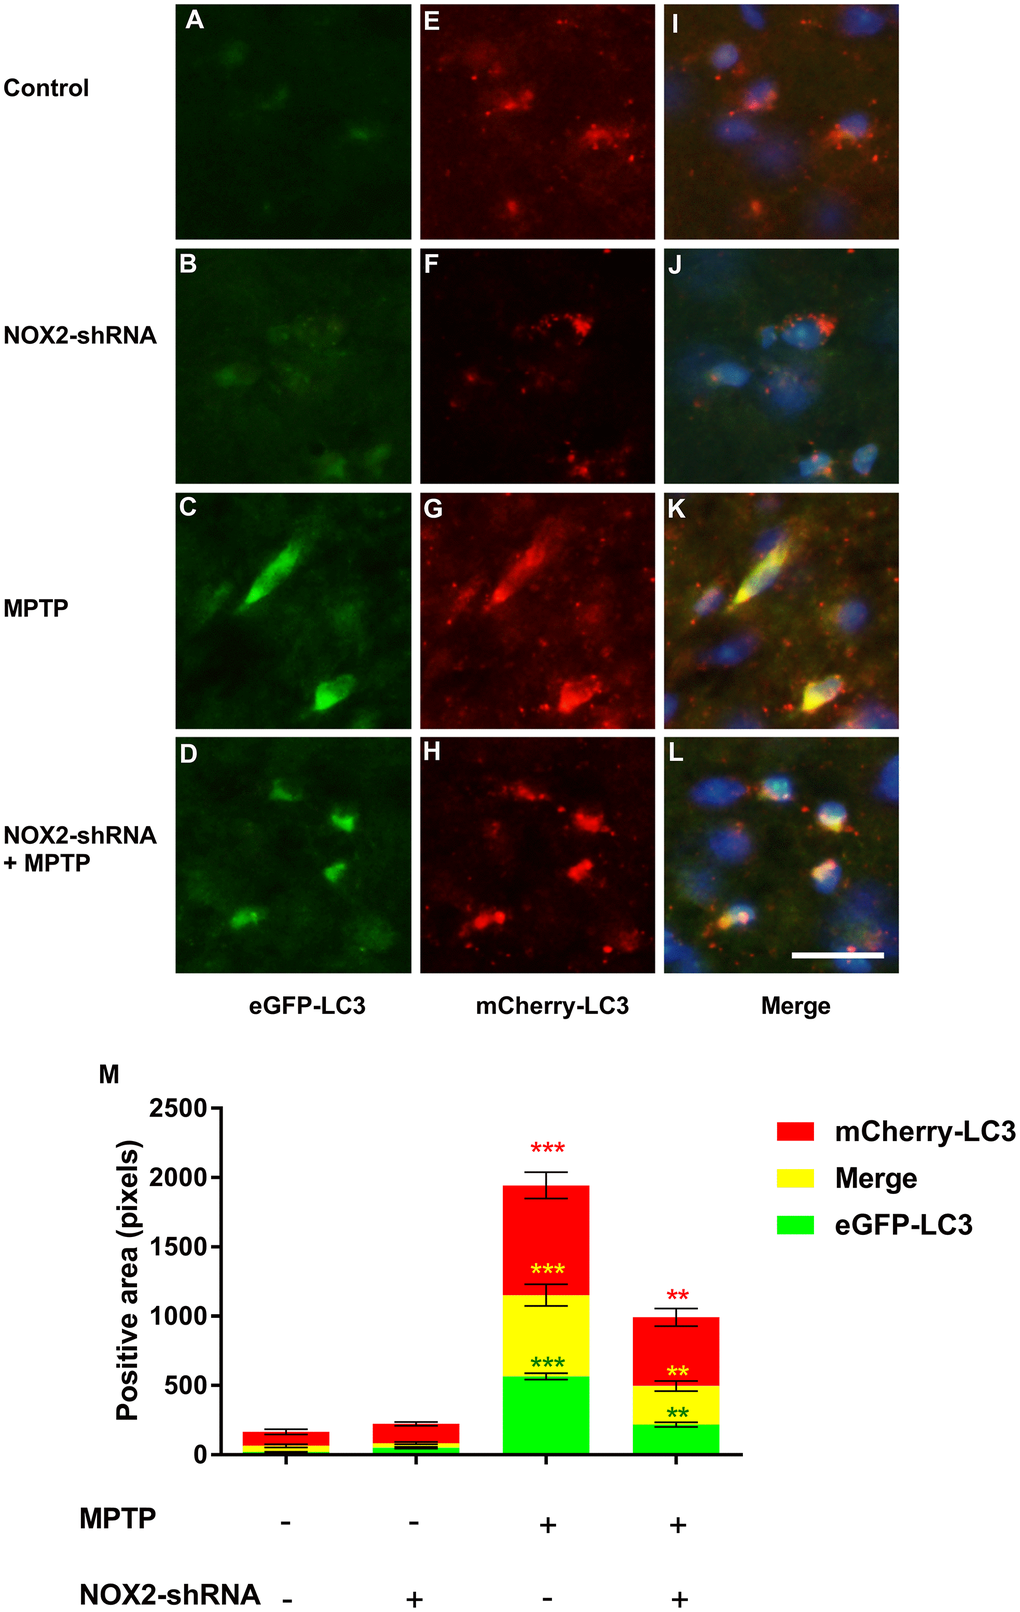 The effect of NOX2 inhibition on autophagic flux. The expression of eGFP-LC3 in the substantia nigra neurons of the marker mouse model (A–D). The expression of mCherry-LC3 in the substantia nigra neurons of the autophagic flux marker mouse model (E–H). The merged figures show the expression of eGFP-mCherry-LC3 (I–L). Bar = 20 μm. Quantitative analysis of eGFP, mCherry and merged positive area (M). The results are expressed as ***p p 